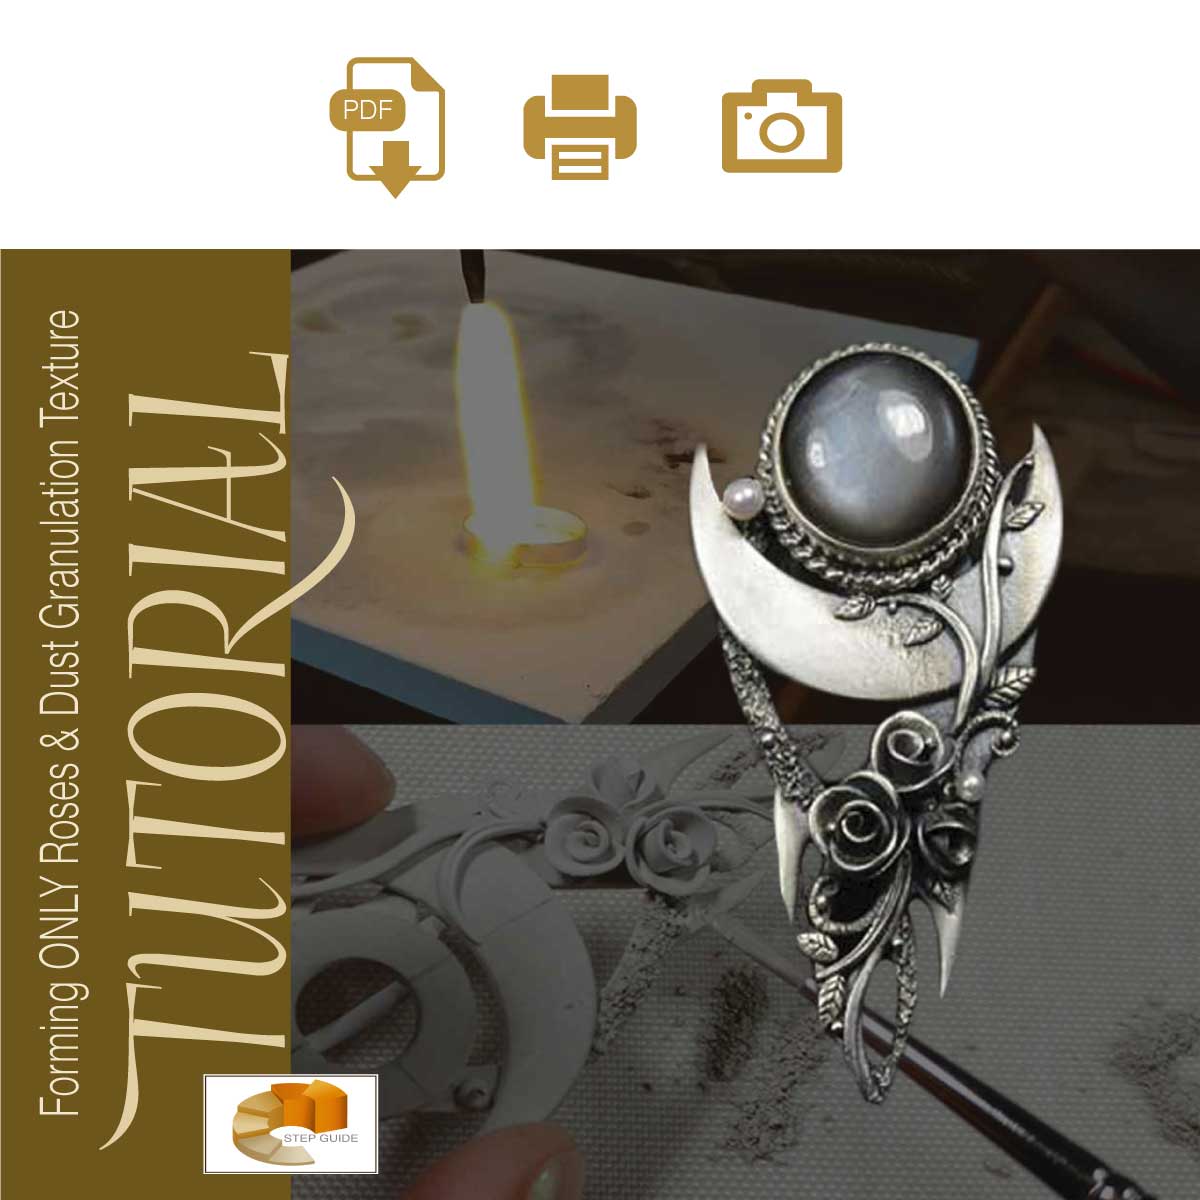 Sky Guide 9+: Silver Metal Clay Hand-forming + Stone Setting Step Guide Tutorial - Making Roses And Dust Granulation Texturing - Metal Clay Adventures